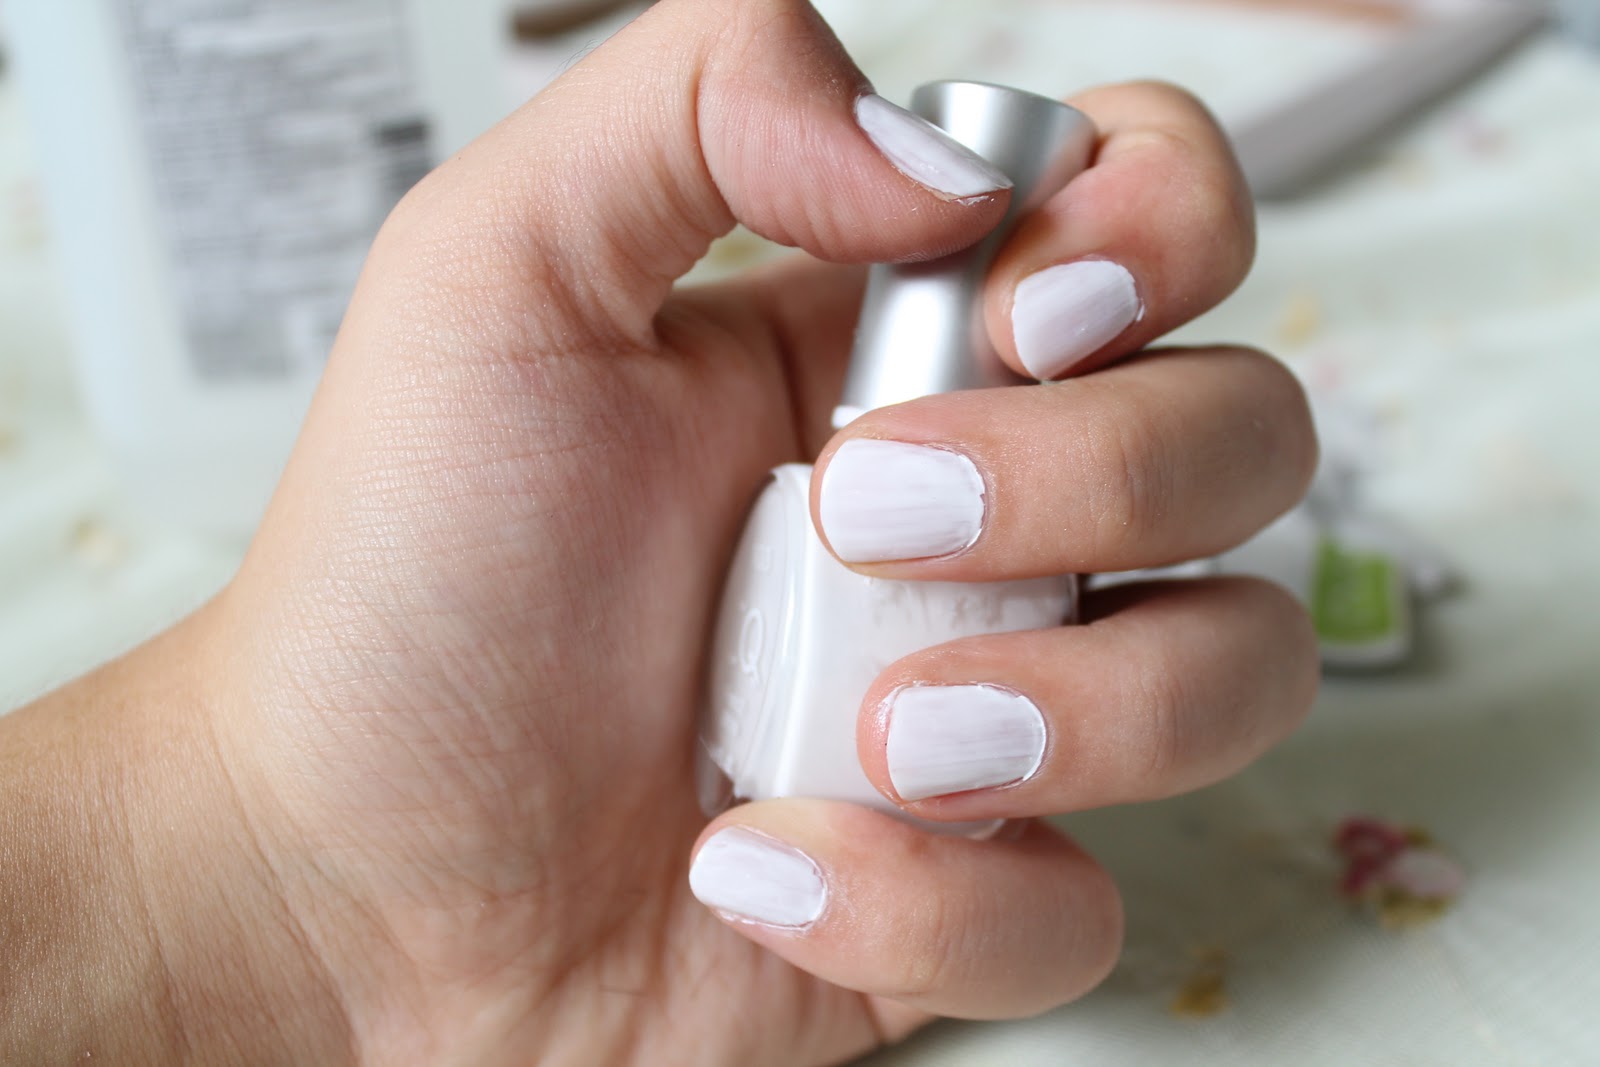 How To Get Newspaper Nails With Water